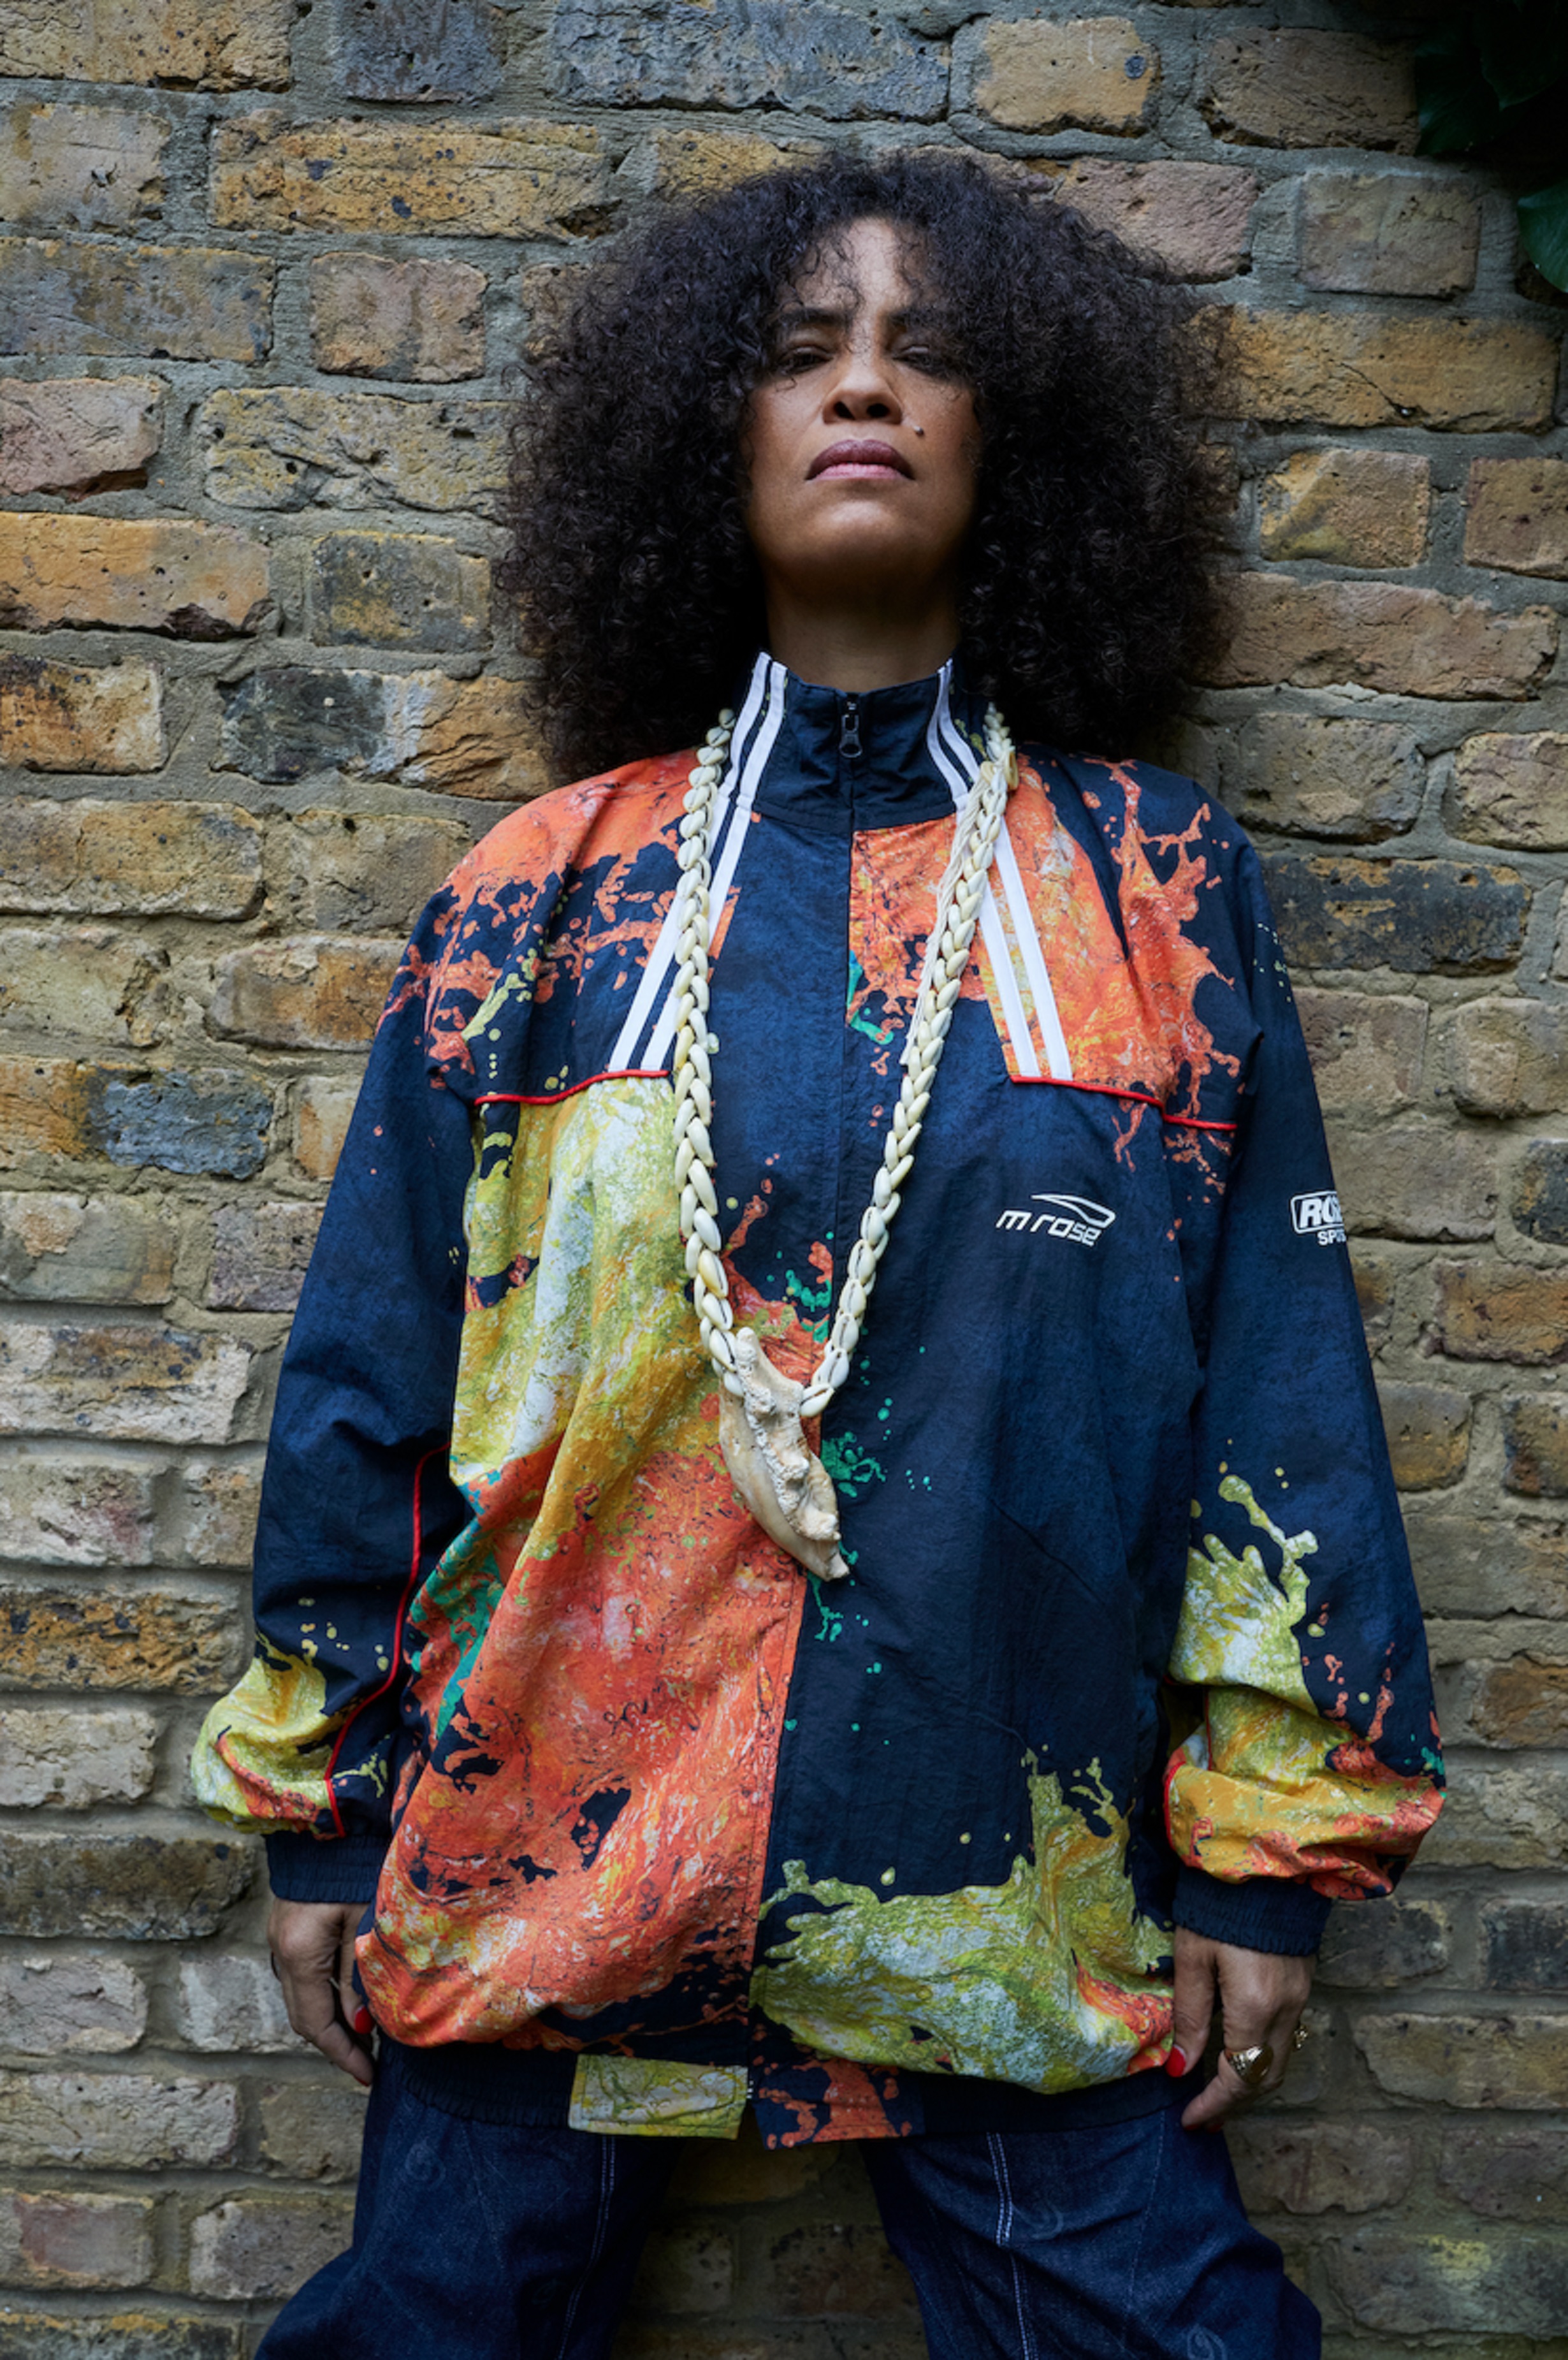 Neneh Cherry "The Versions" Album out 6/10